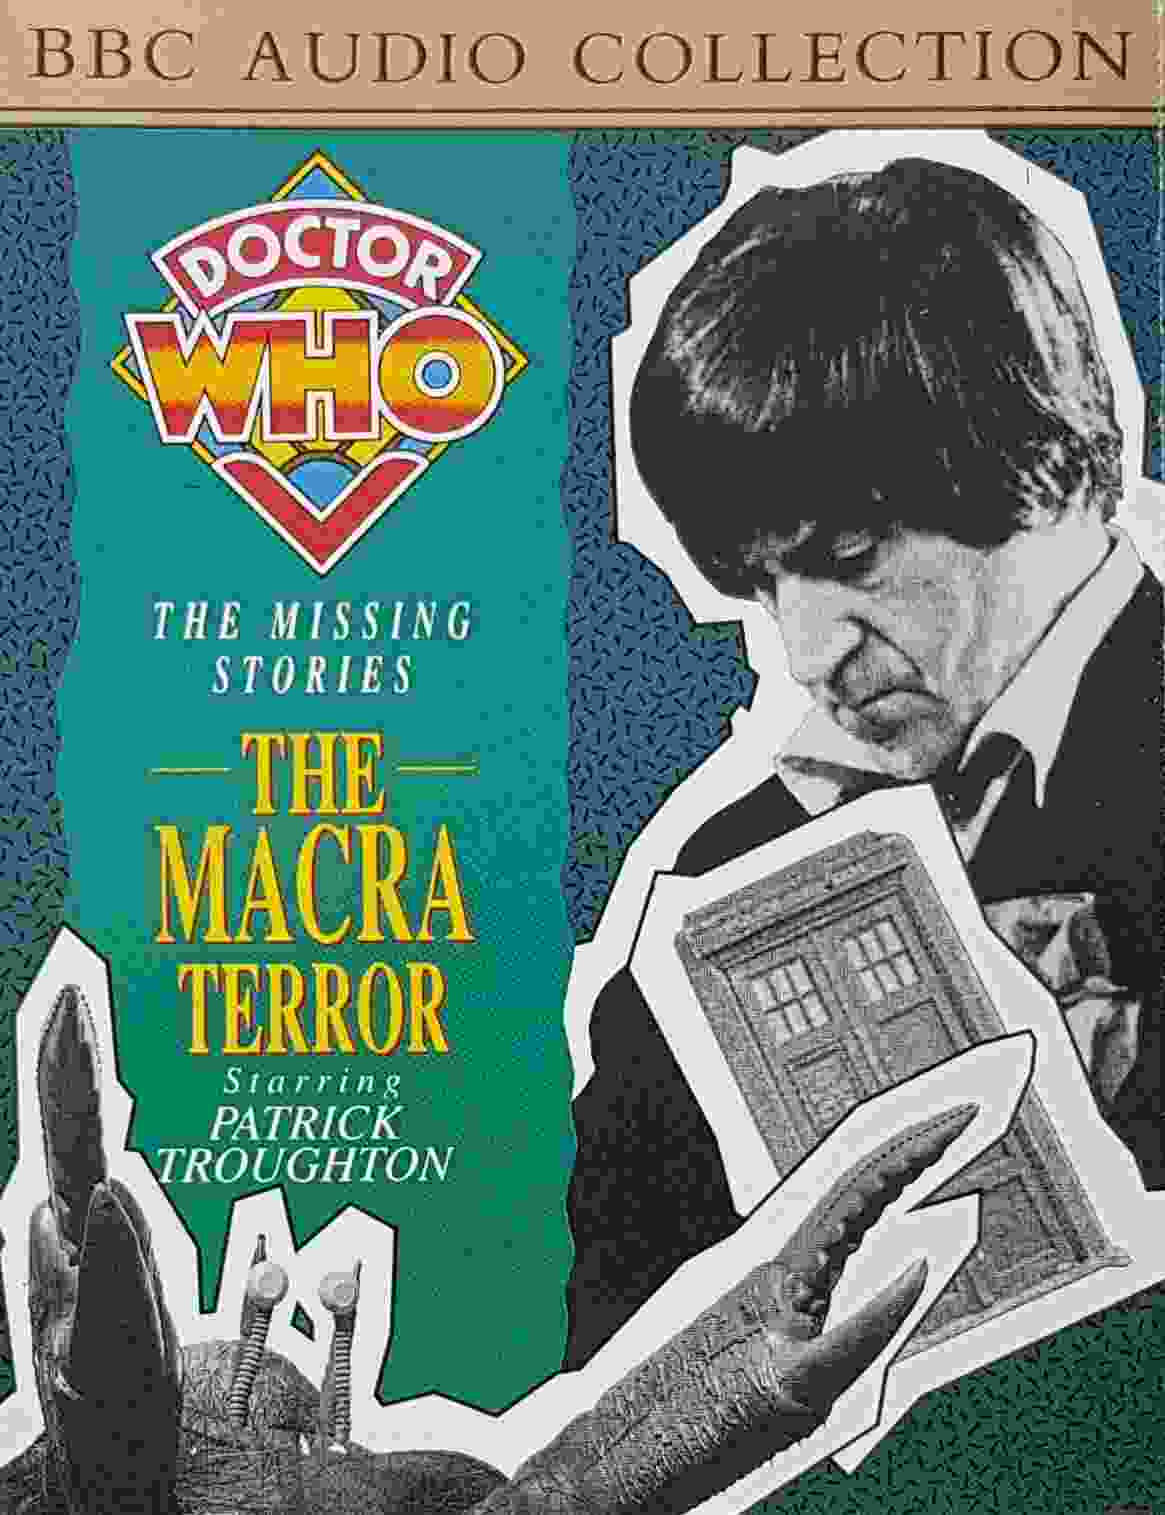 Picture of ZBBC 1342 Doctor Who - The Macra terror by artist Ian Stuart Black from the BBC records and Tapes library